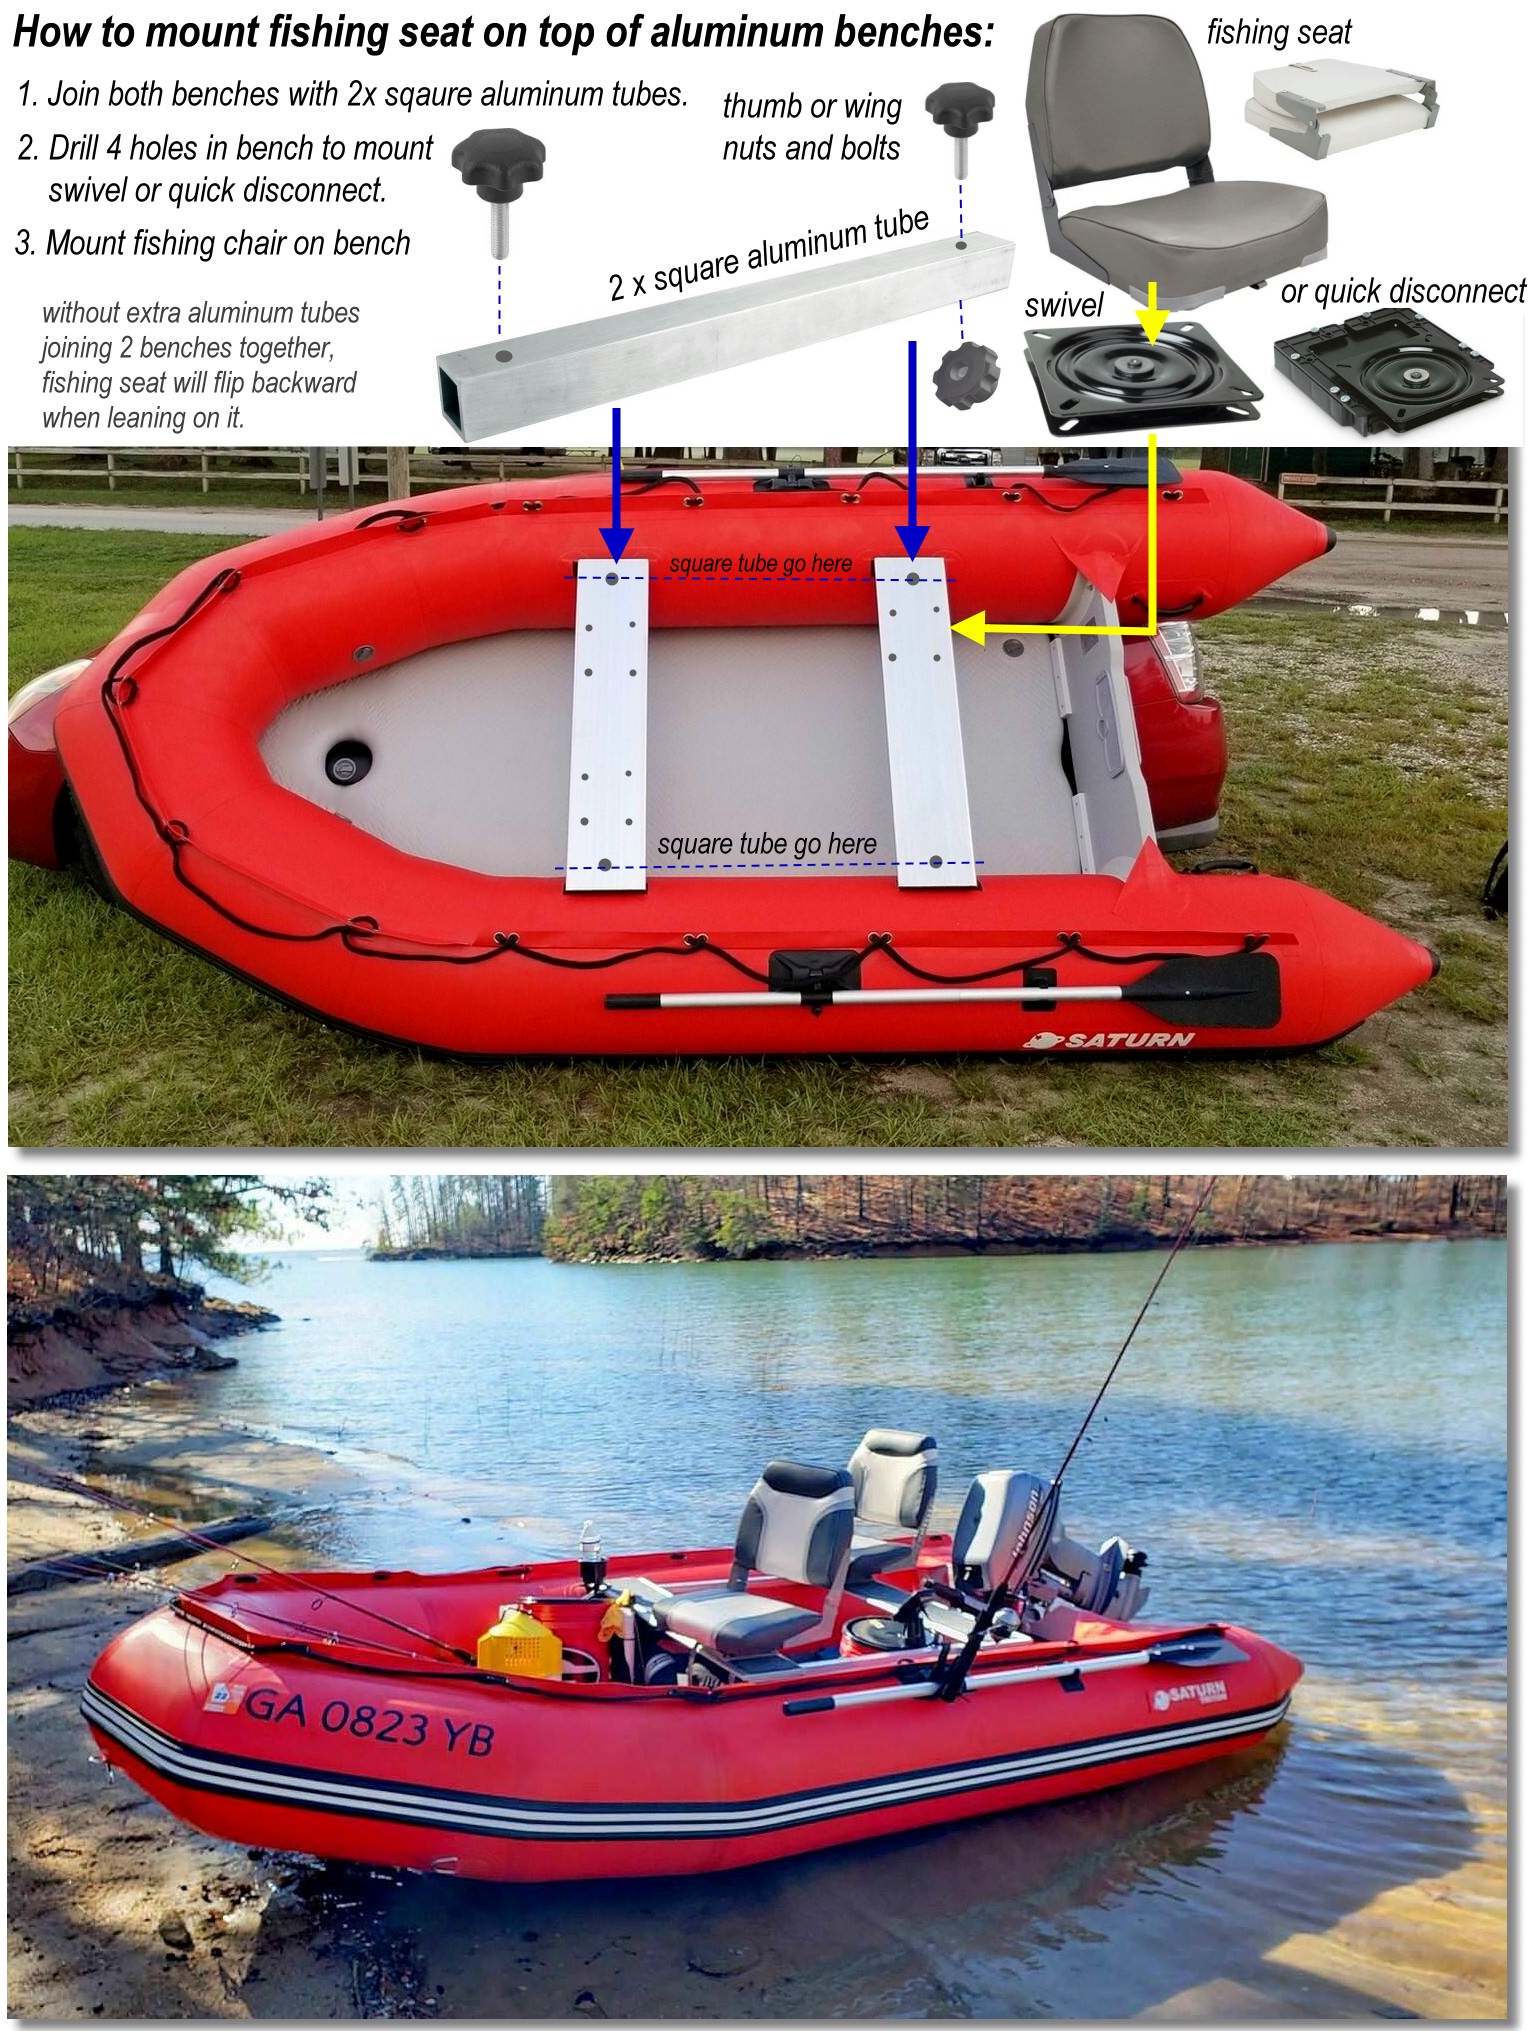 How to mount fishing seat on top of aluminum benches of inflatable boat